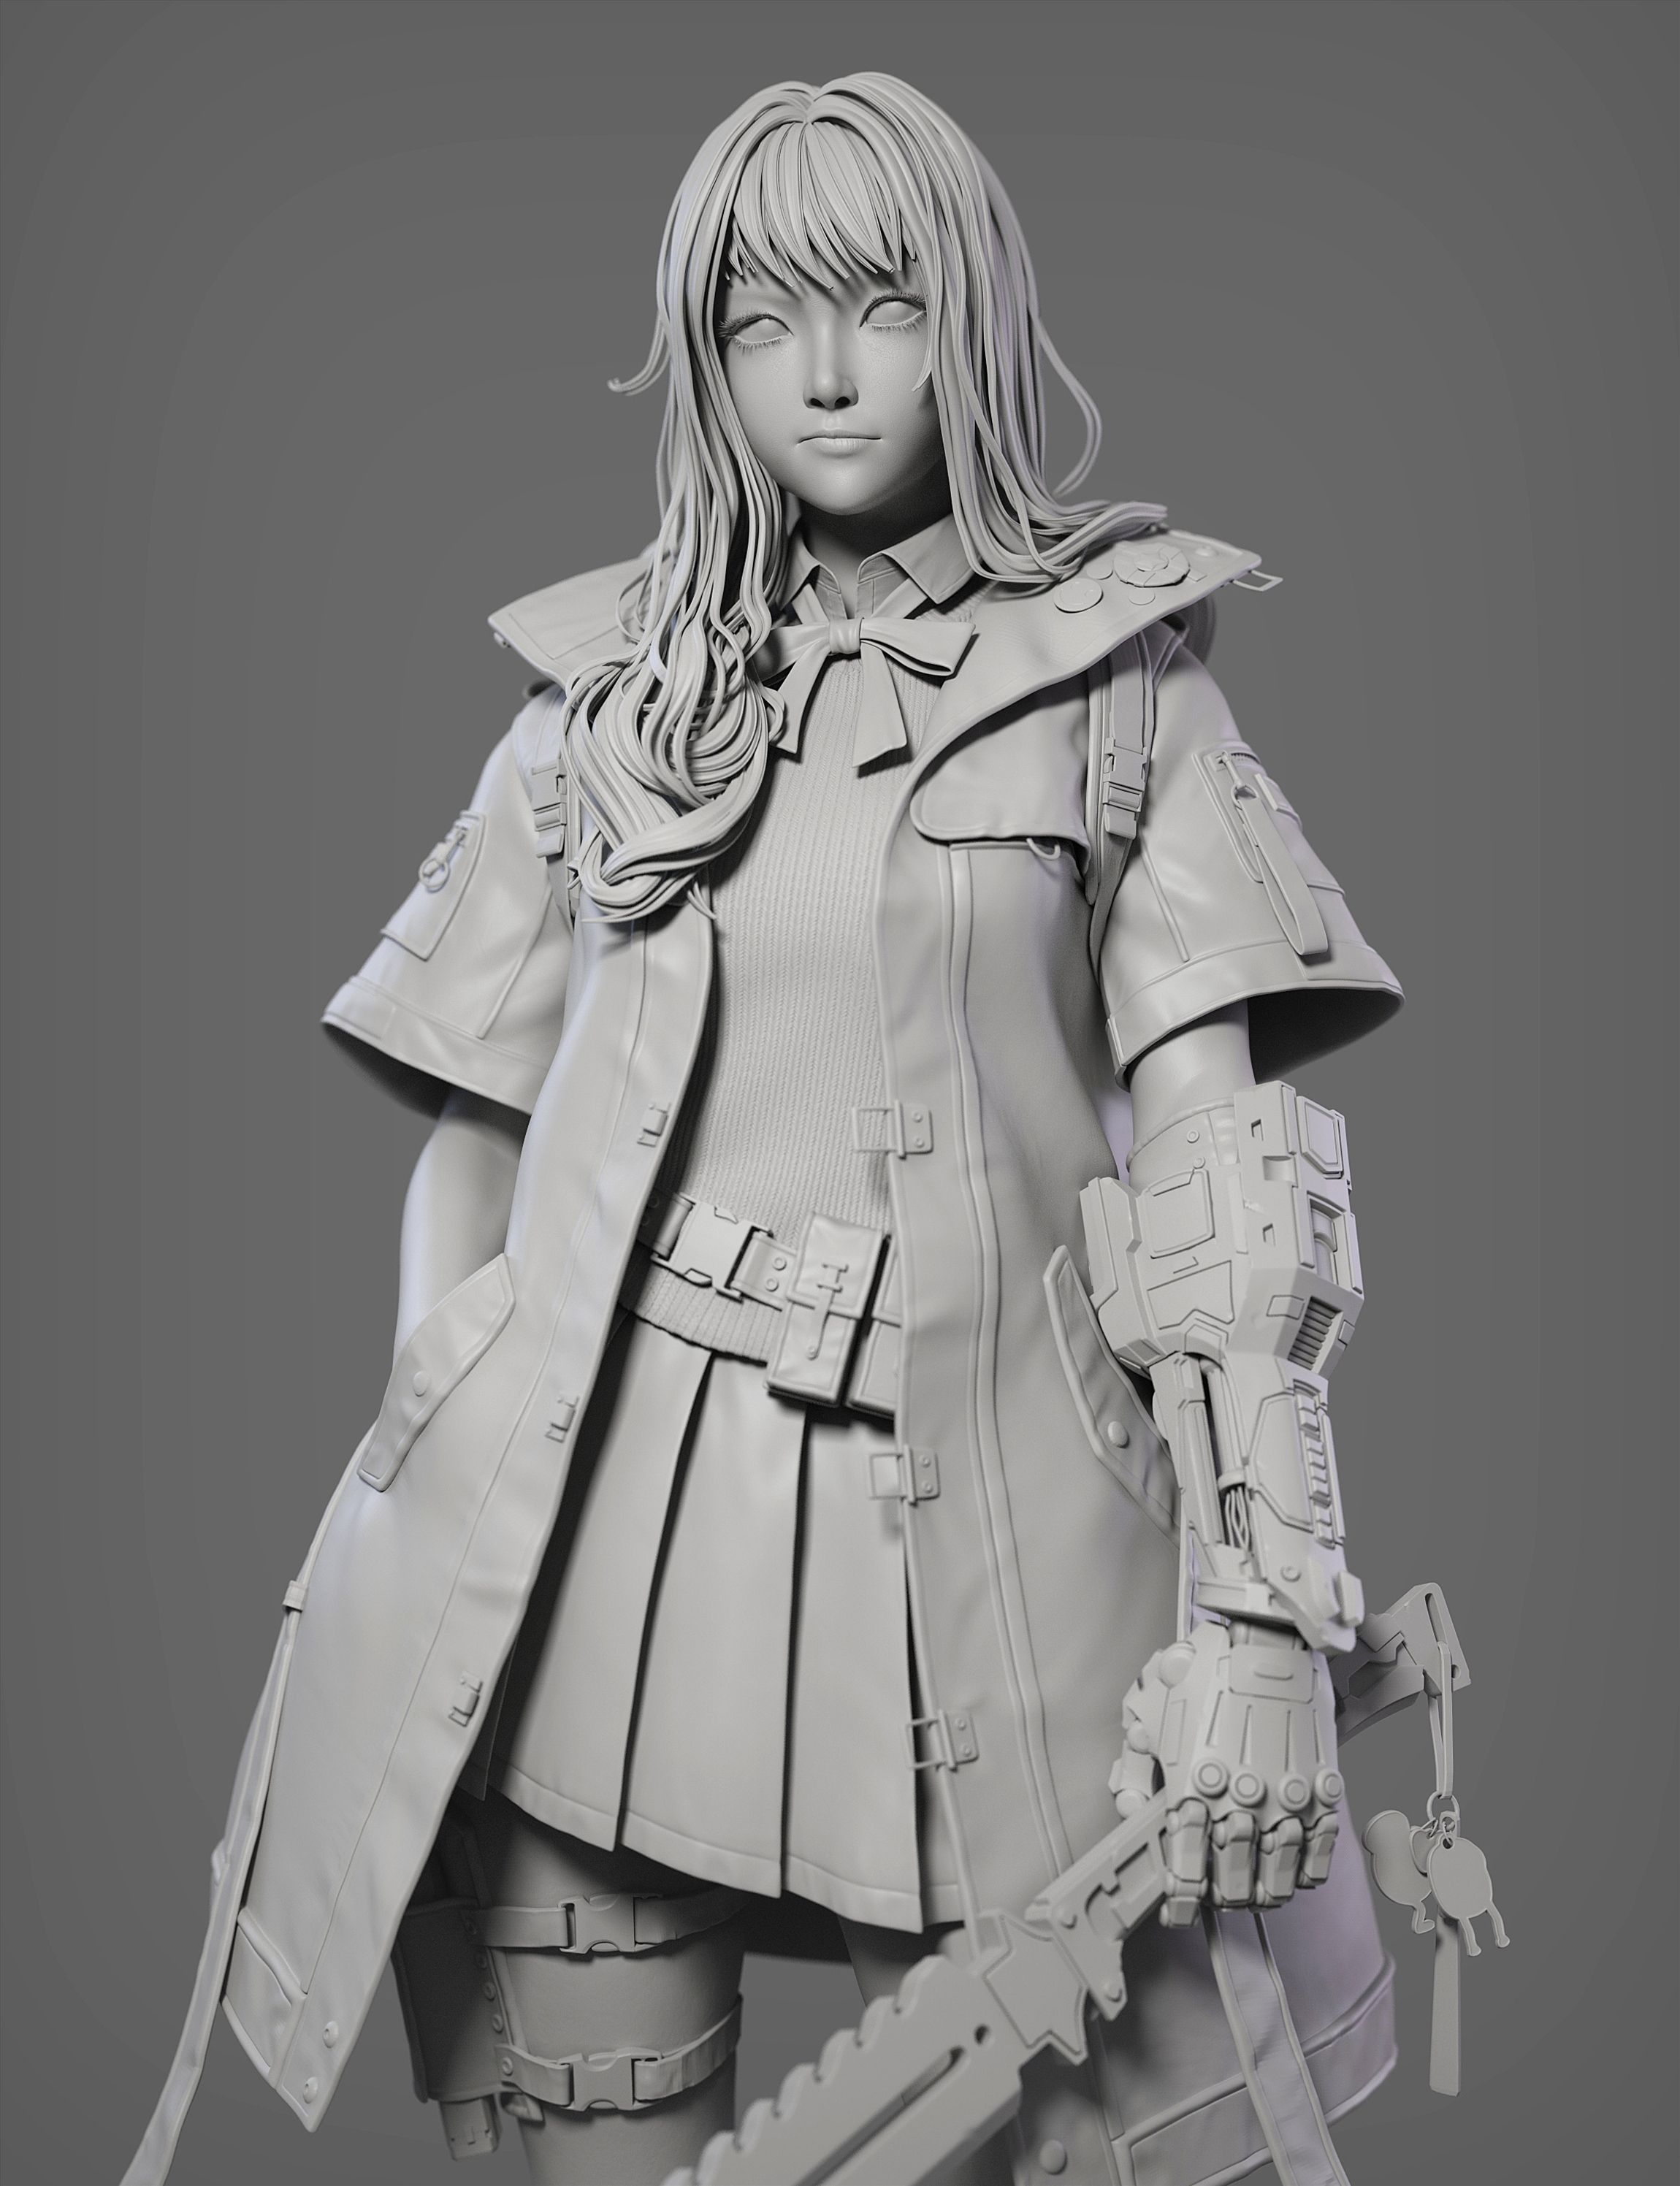 zbrush student trial